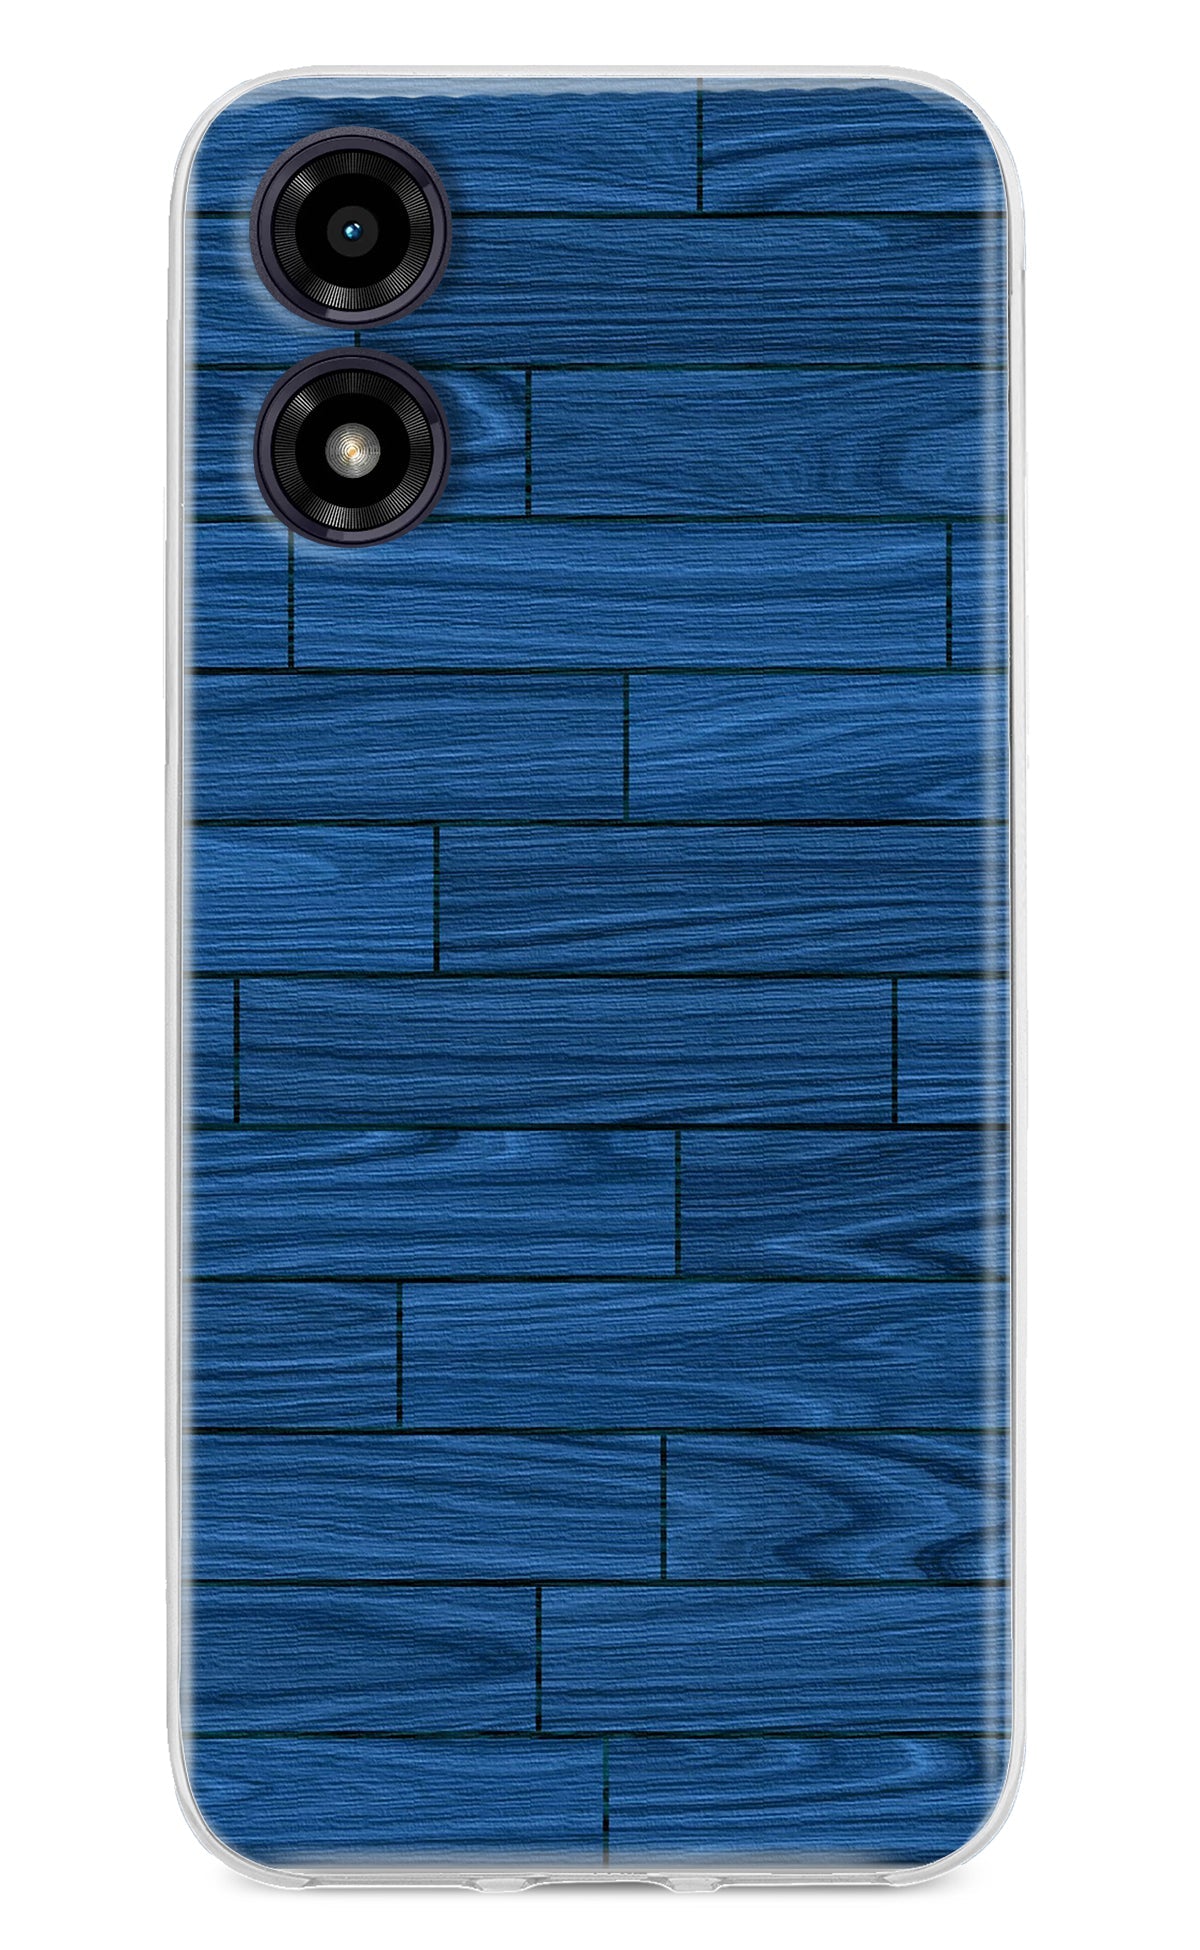 Wooden Texture Moto G04 Back Cover